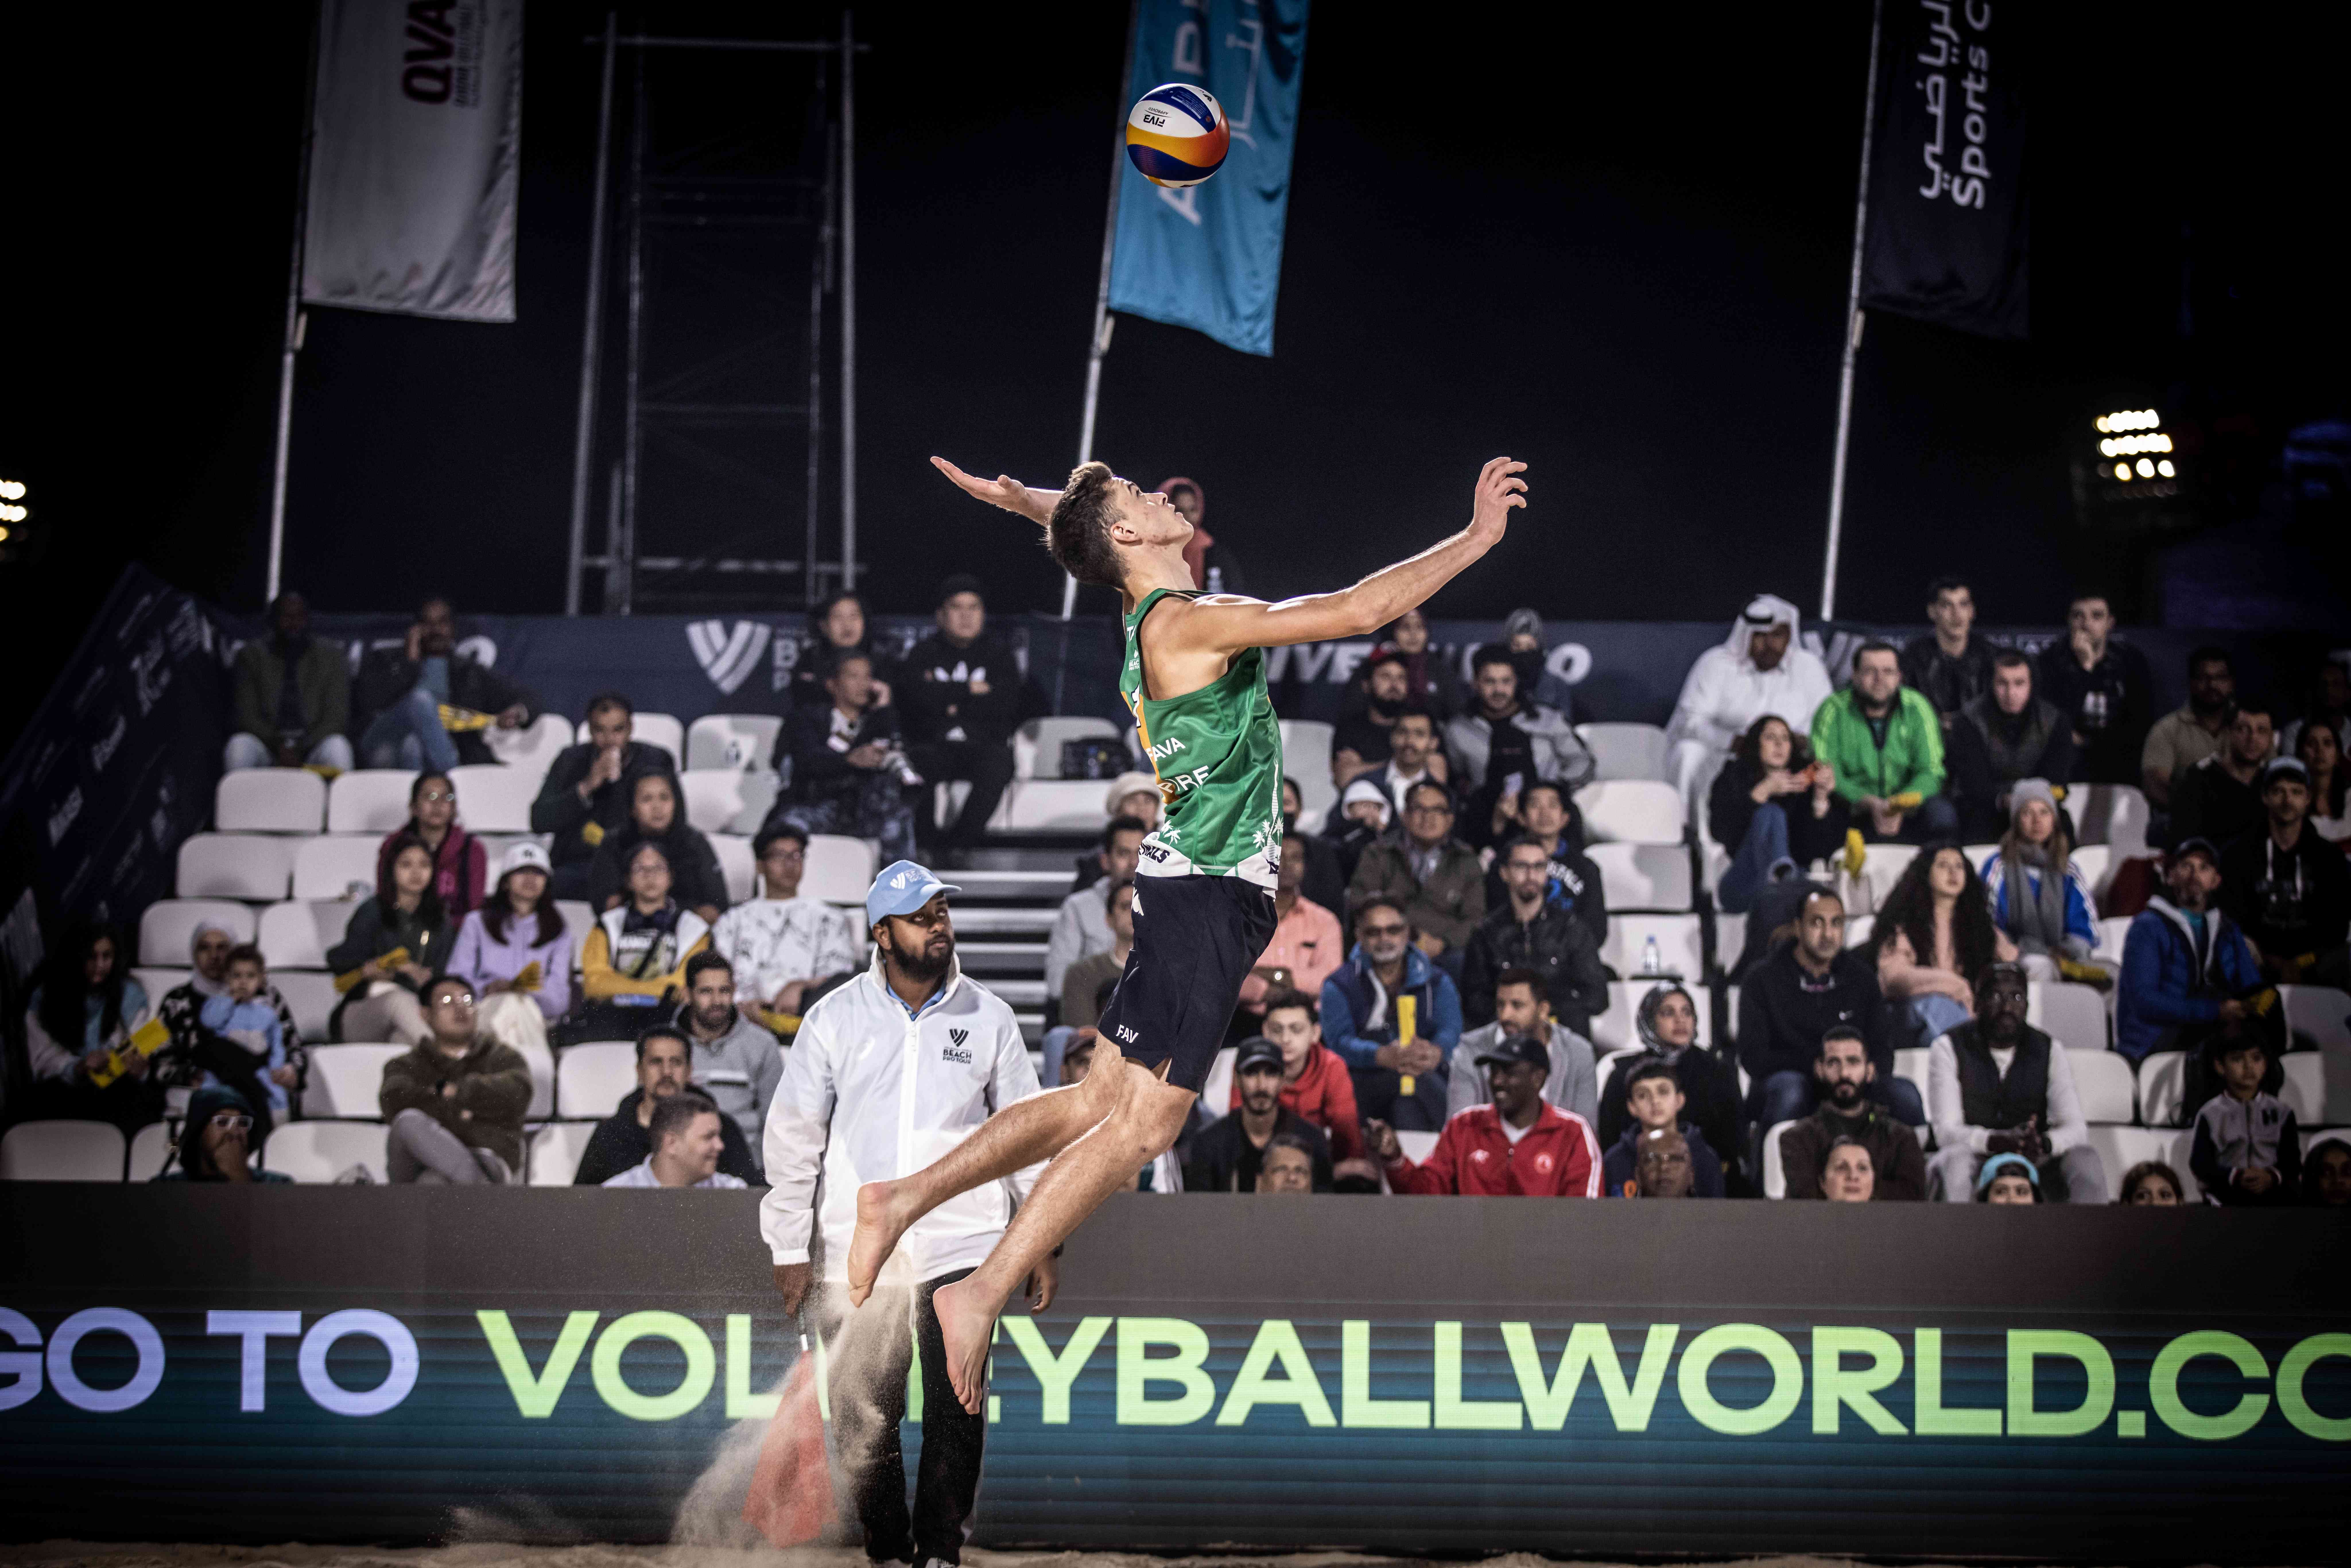 FanCode teams up with Volleyball World to bring international volleyball to fans of India! volleyballworld